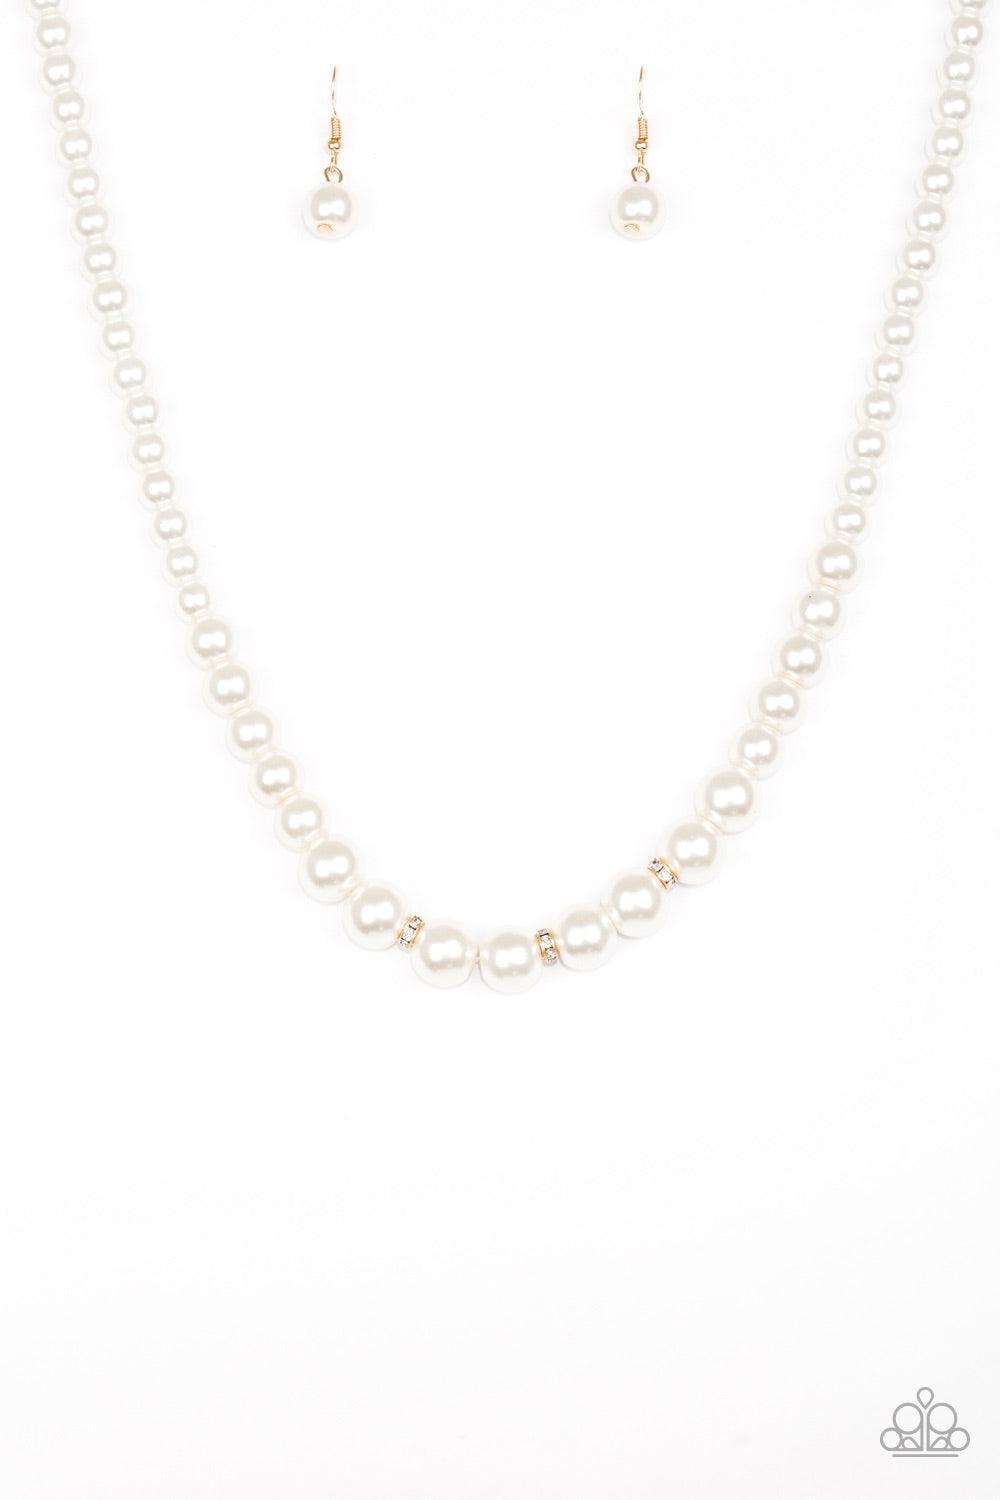 Paparazzi Accessories Royal Romance - Gold Gradually increasing in size near the center, a strand of luminescent white pearls falls just below the collar. White rhinestone encrusted rings are sprinkled along the center for a timeless finish. Features an a